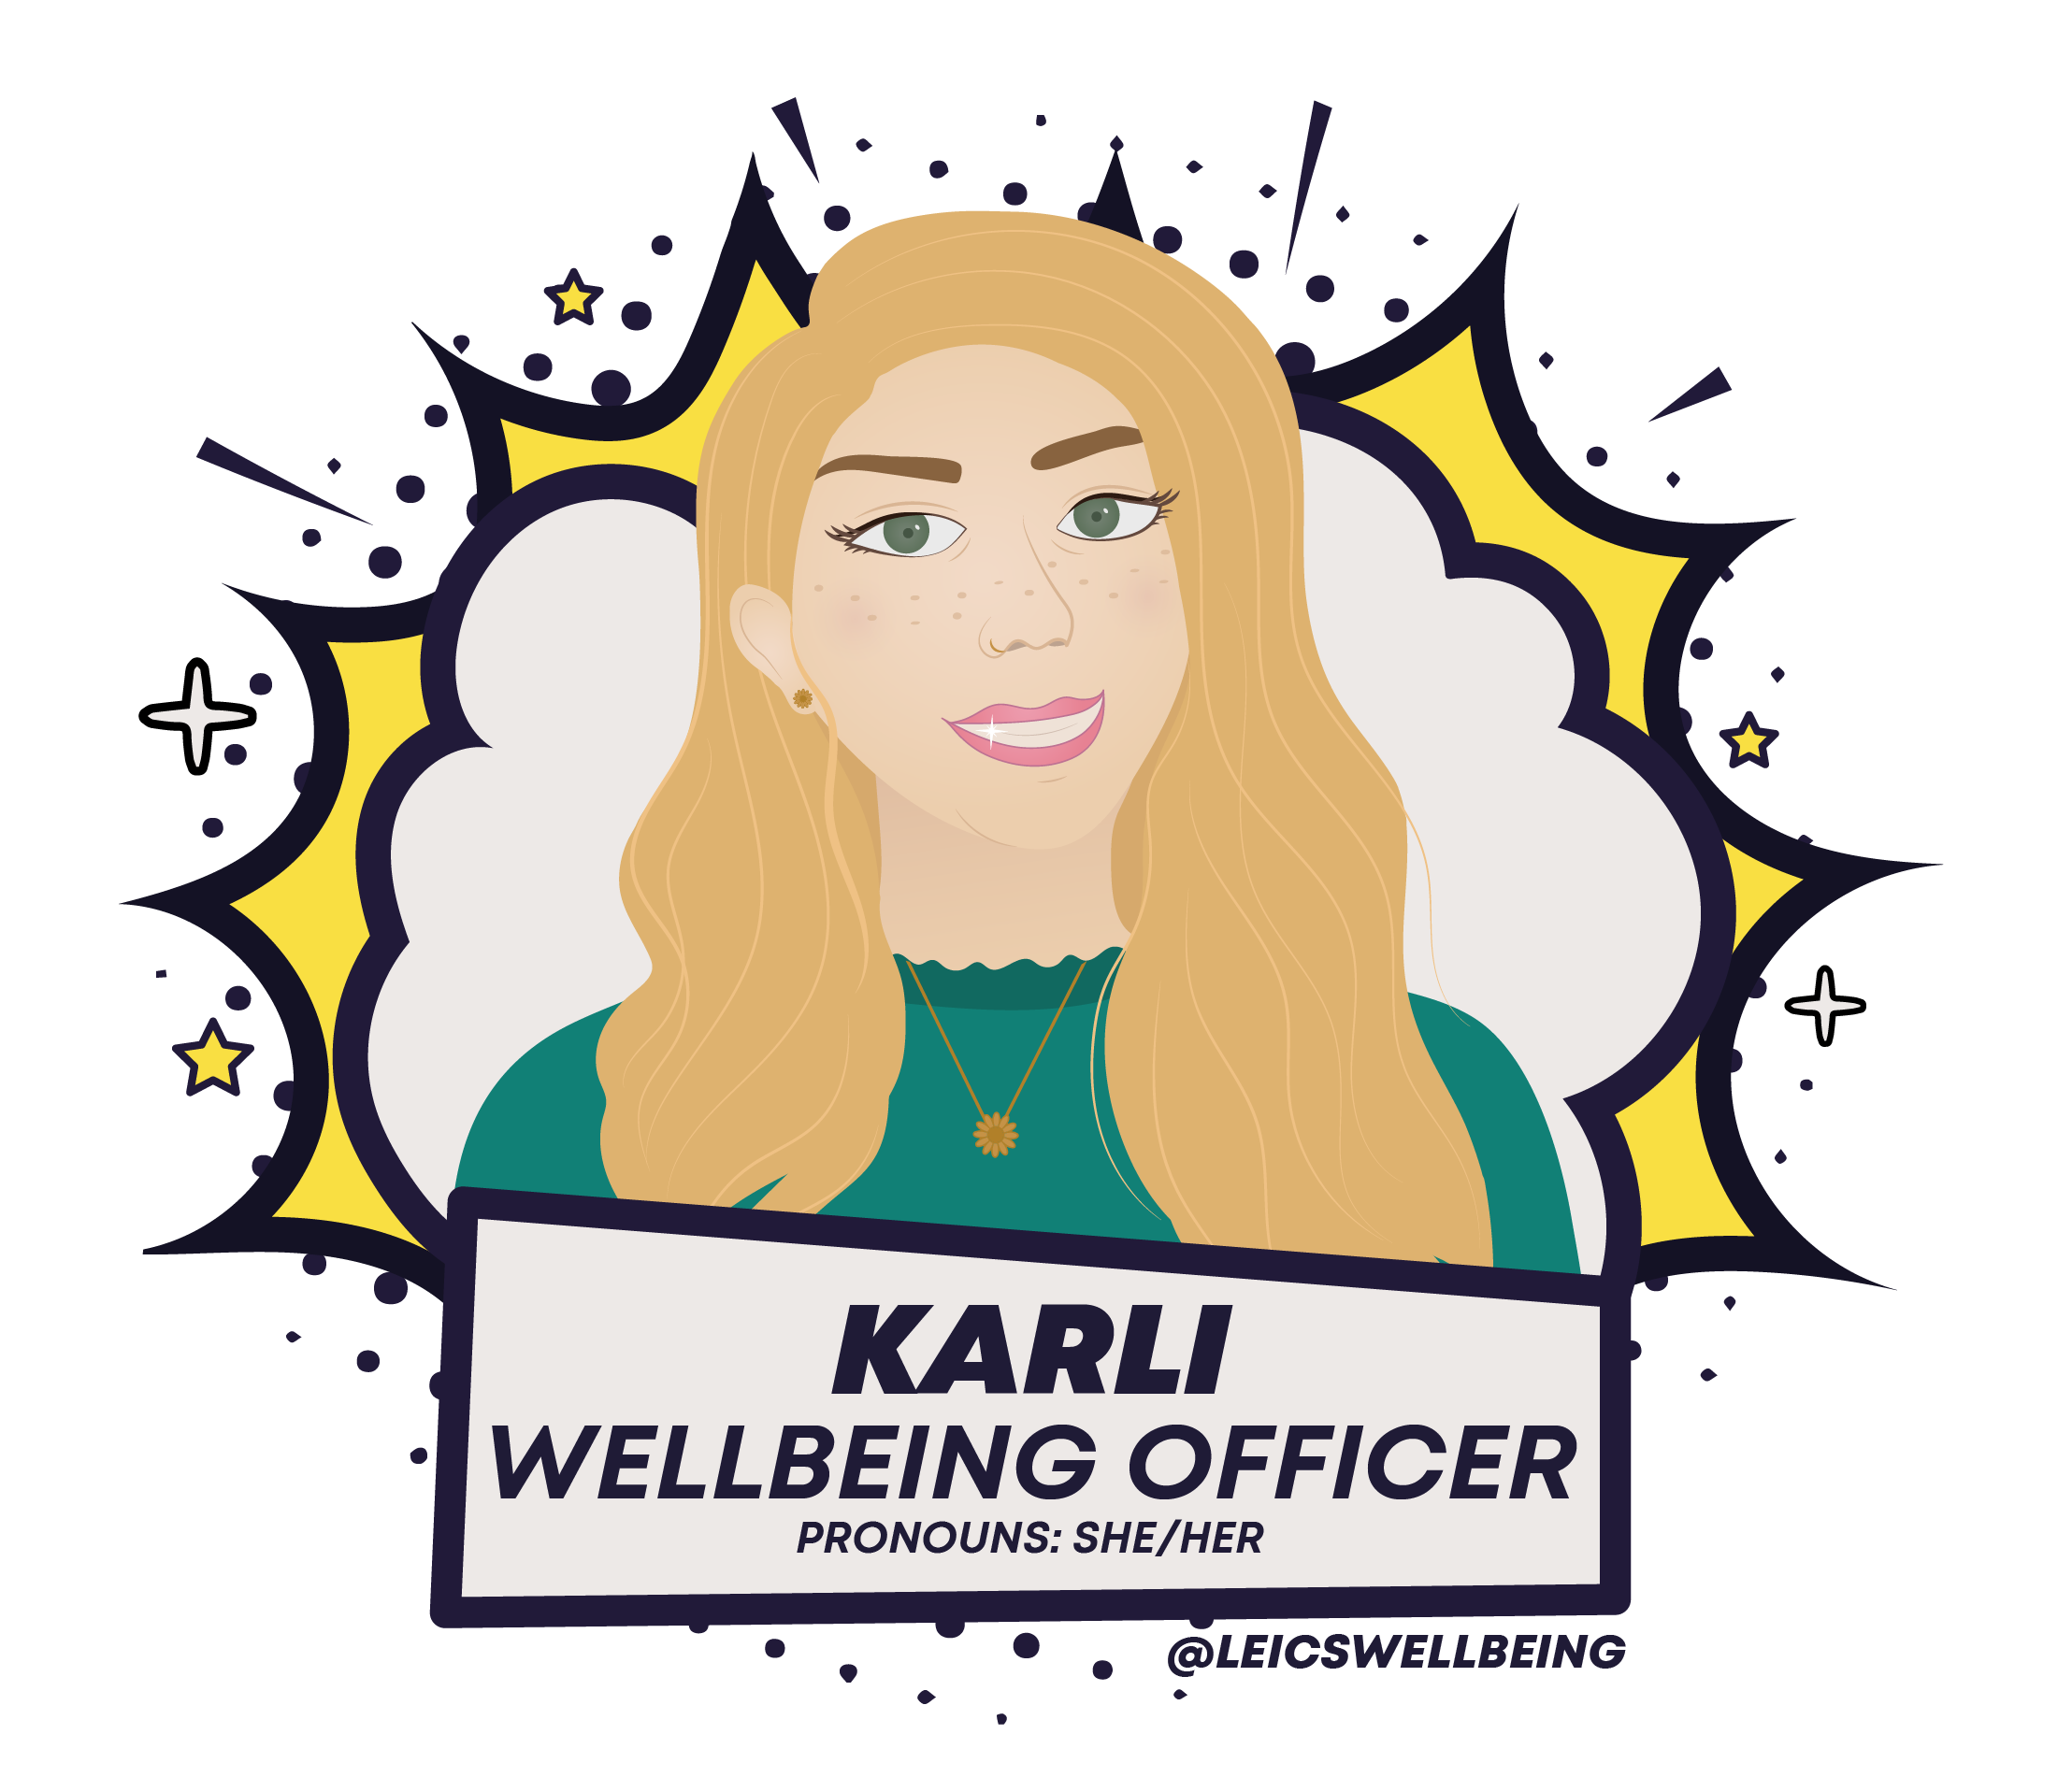 Image of Karli Wagner, Wellbeing Officer She/Her, click for full profile